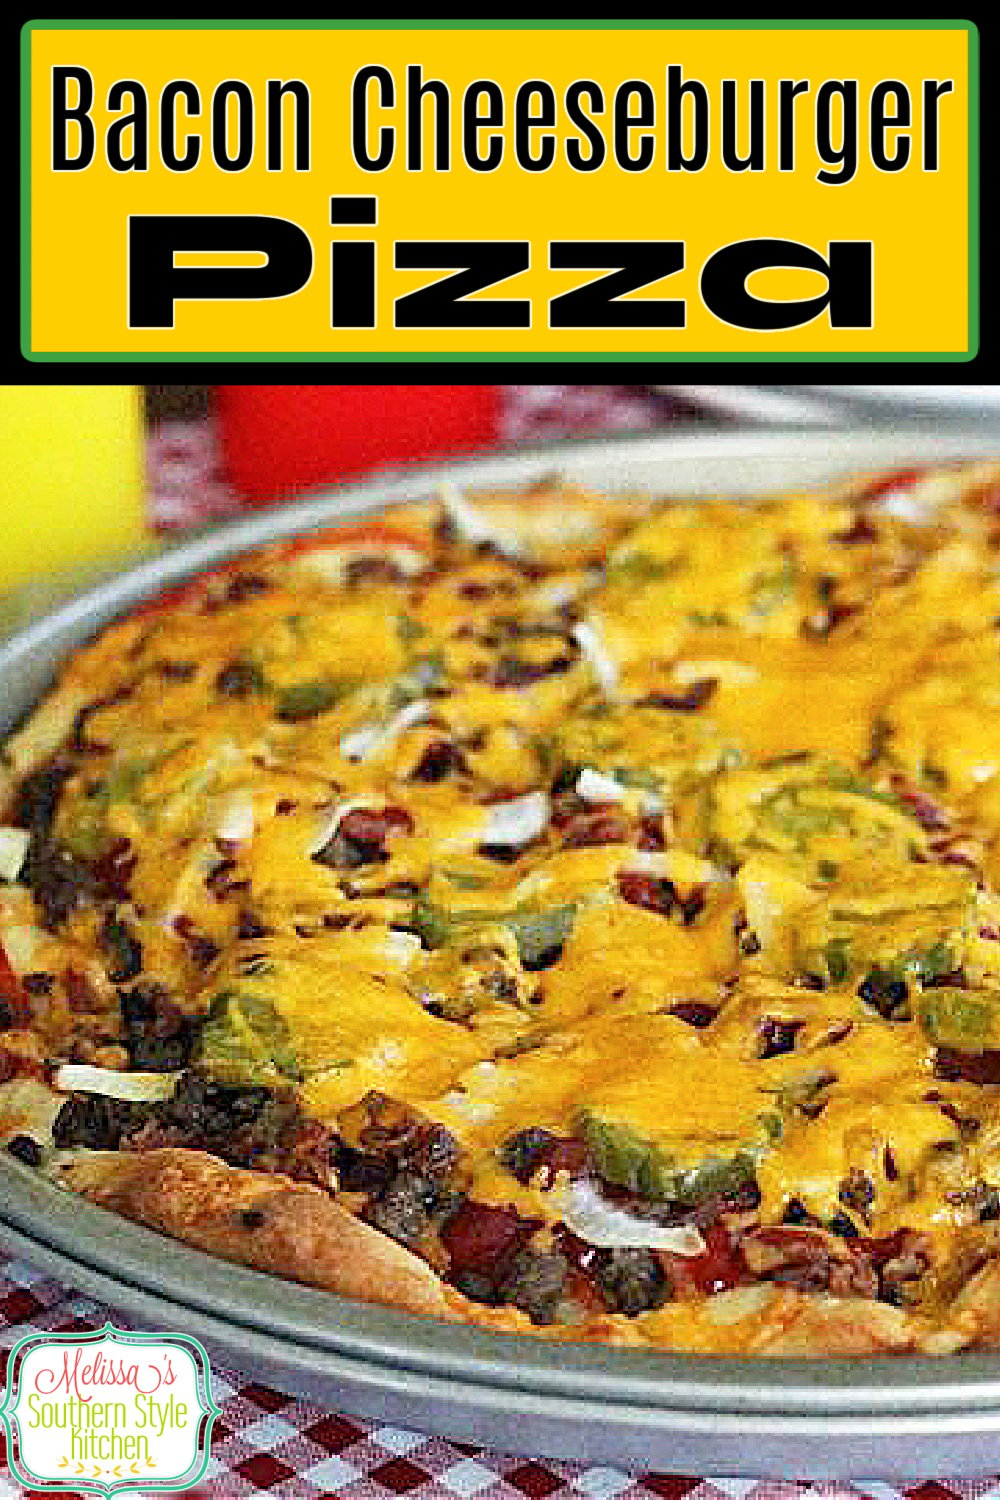 Skip the buns and make this Bacon Cheeseburger Pizza for dinner, instead #baconcheeseburgerpizza #cheeseburgers #baconcheeseburgers #pizzarecipes #baconrecipes #dinnerideas #30minutemeals #easygroundbeefrecipes #southernfood #southernrecipes via @melissasssk